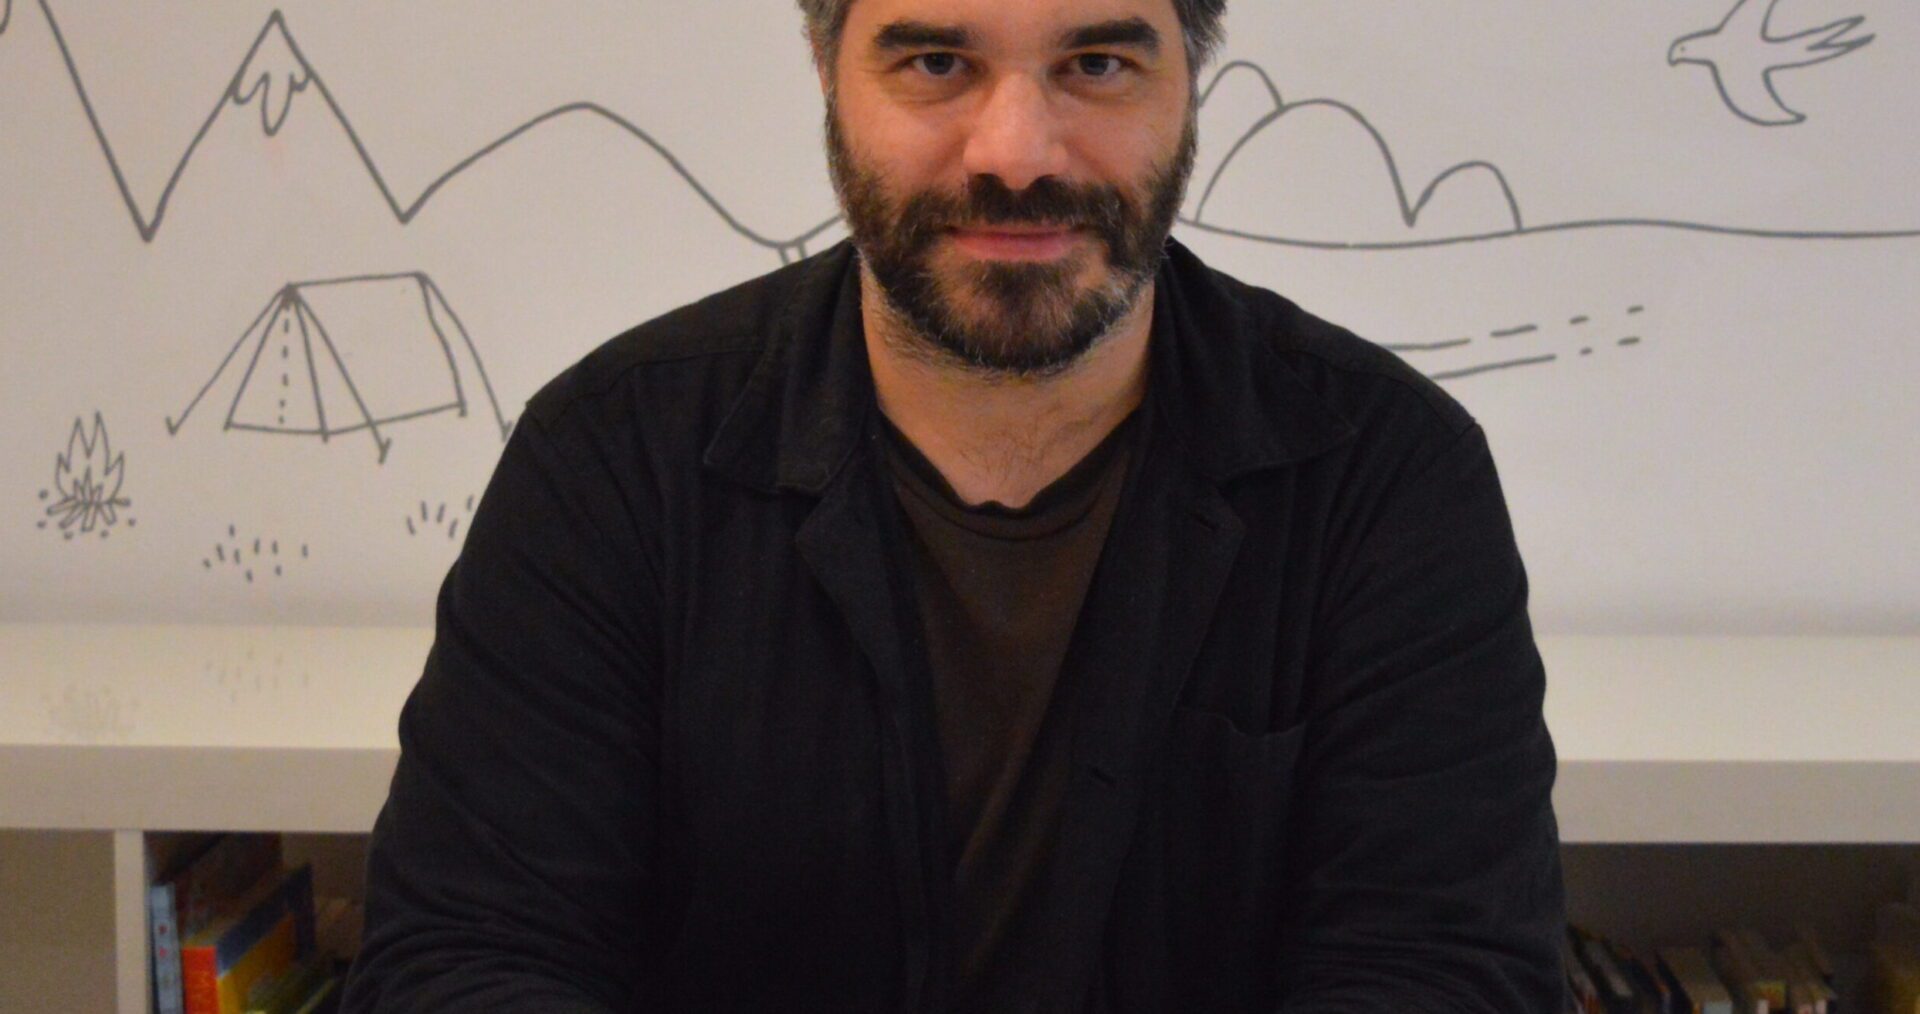 Michael Crowe sits with his hands folded on a white desk. He has short, styled black hair with flecks of grey above his ears. He has a short beard and is wearing a black jacket over a brown t-shirt.